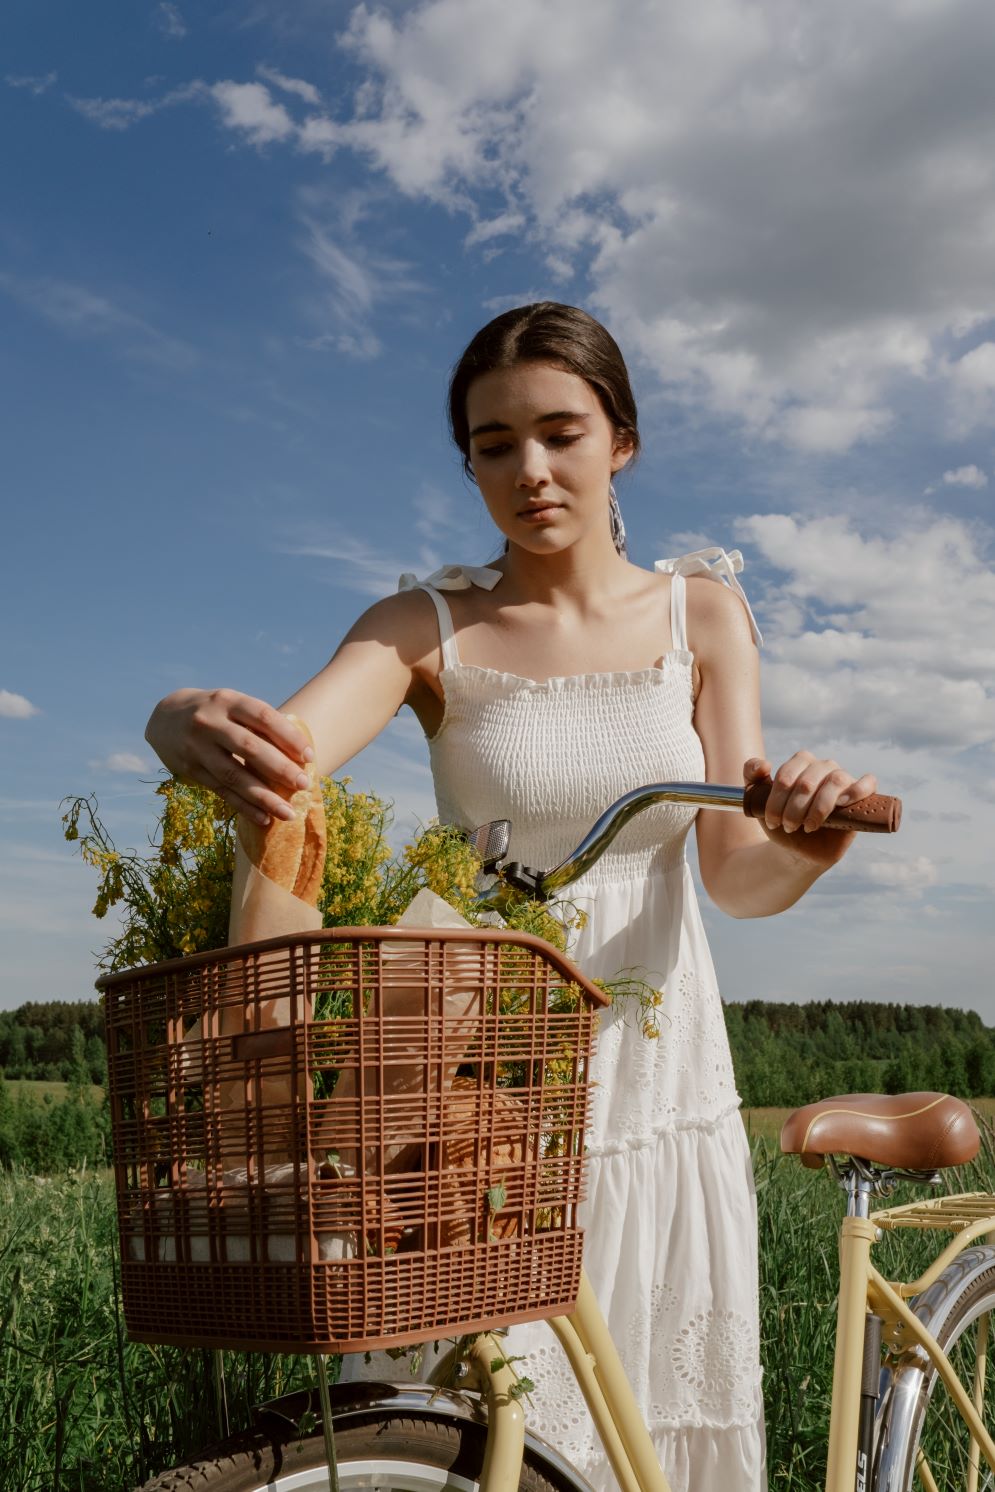 women with bicycle and food in basket